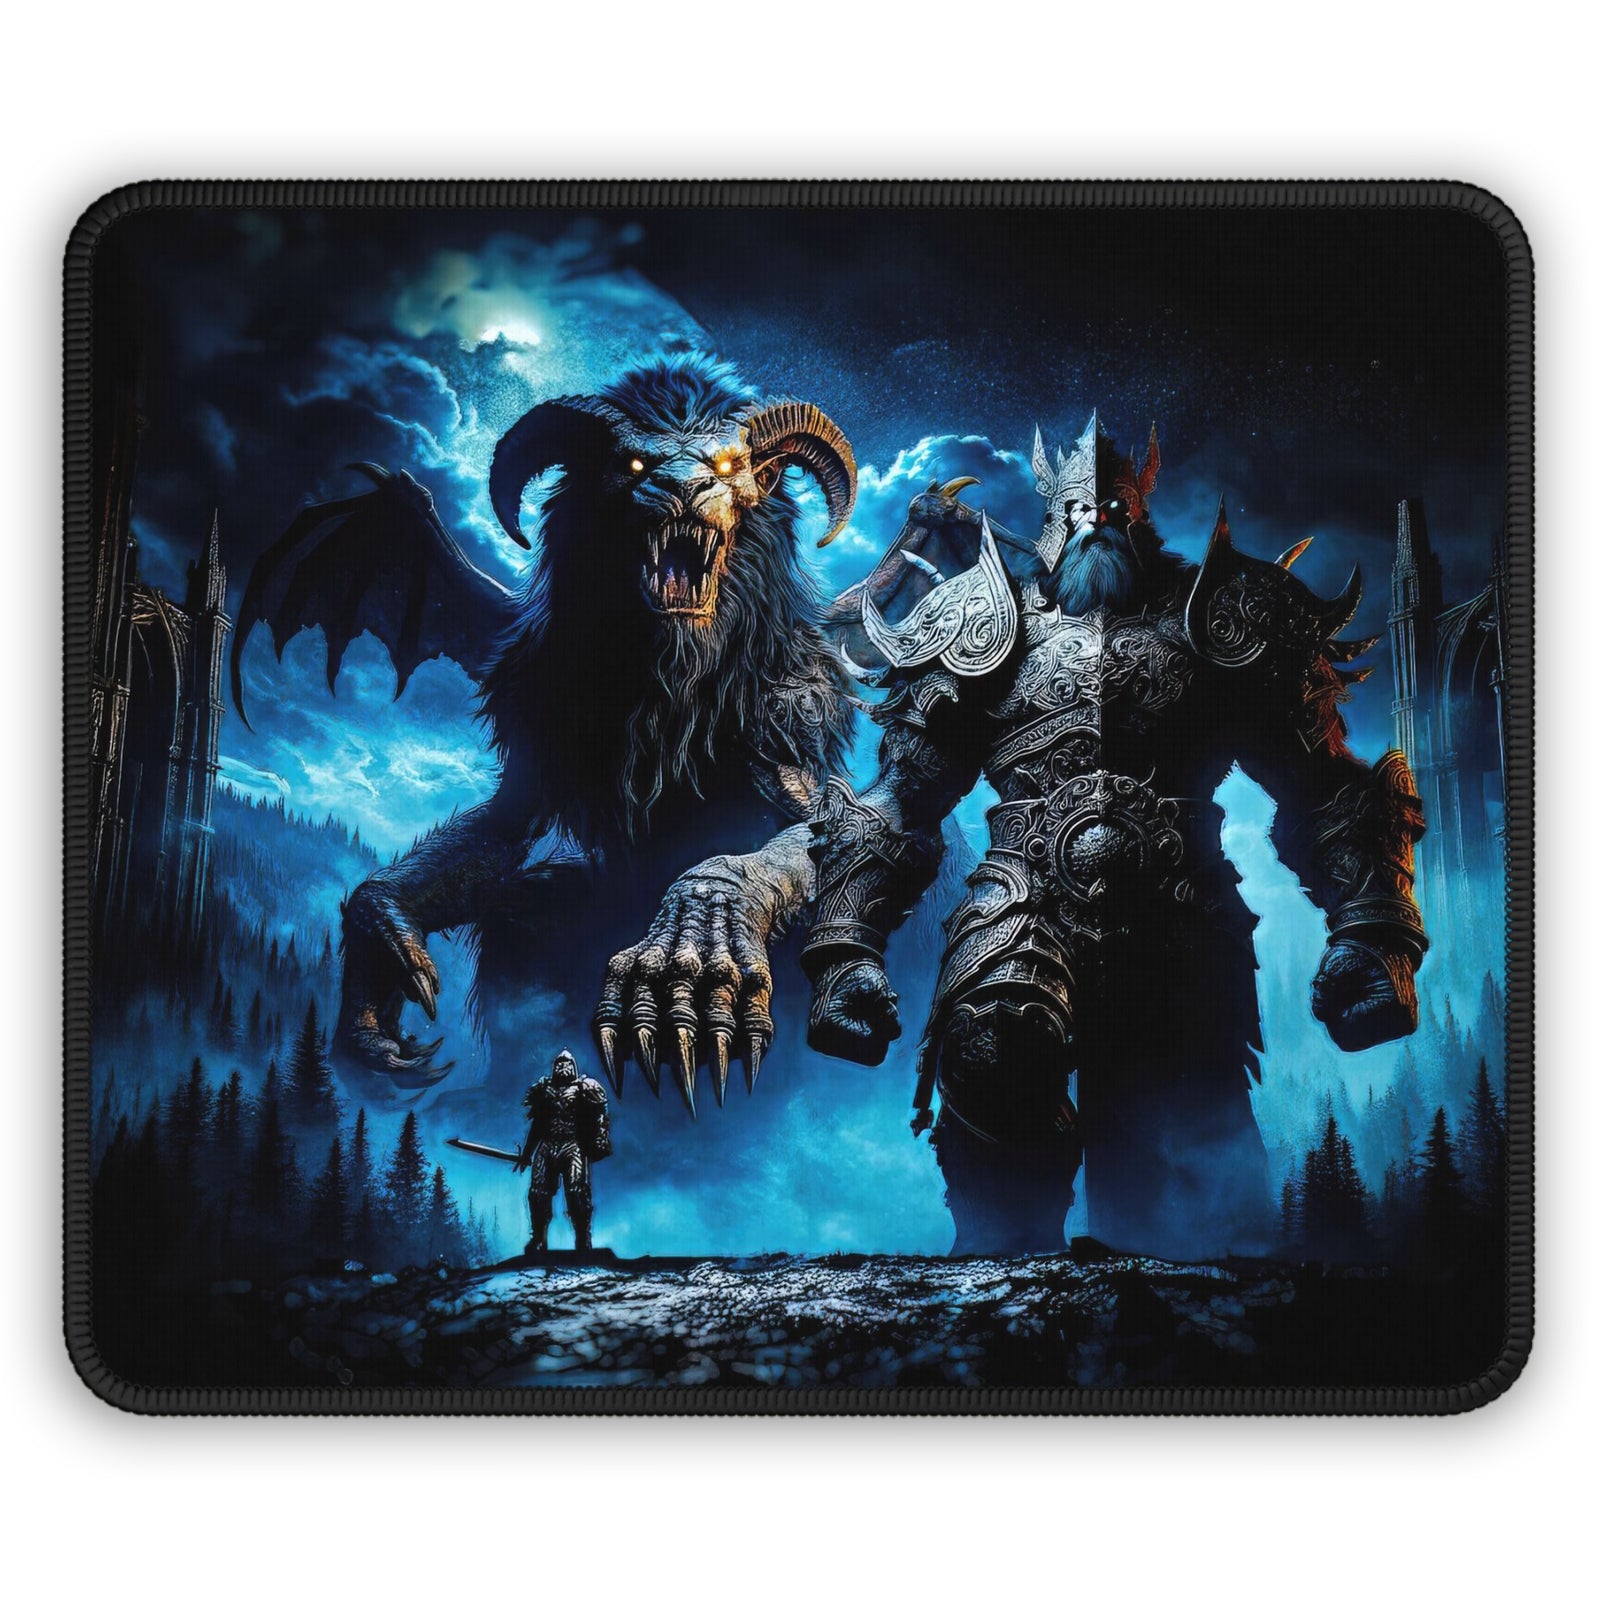 The Clash of Epochs Gaming Mouse Pad